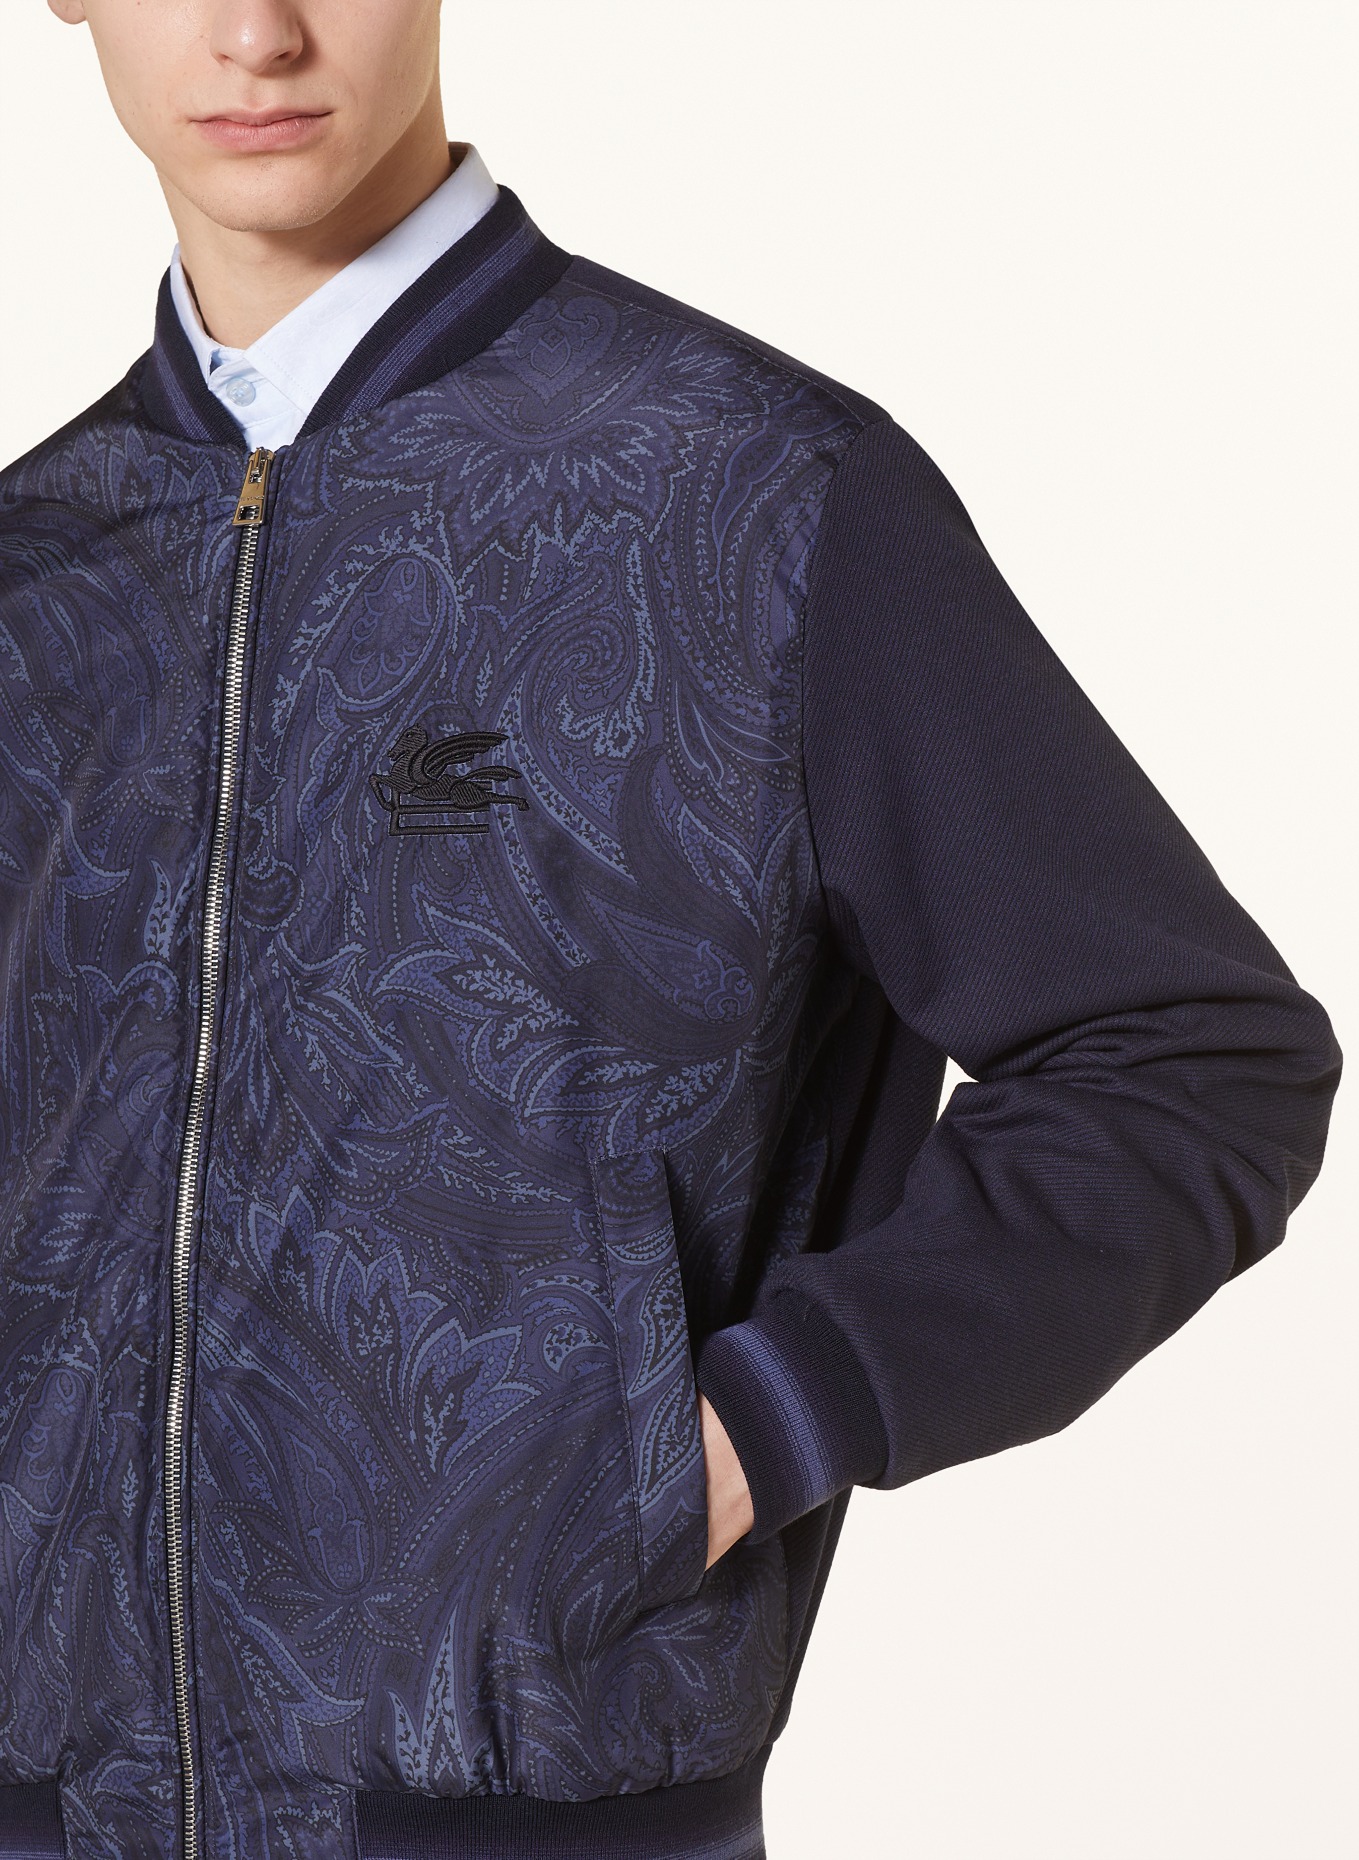 ETRO College jacket in mixed materials, Color: DARK BLUE (Image 4)